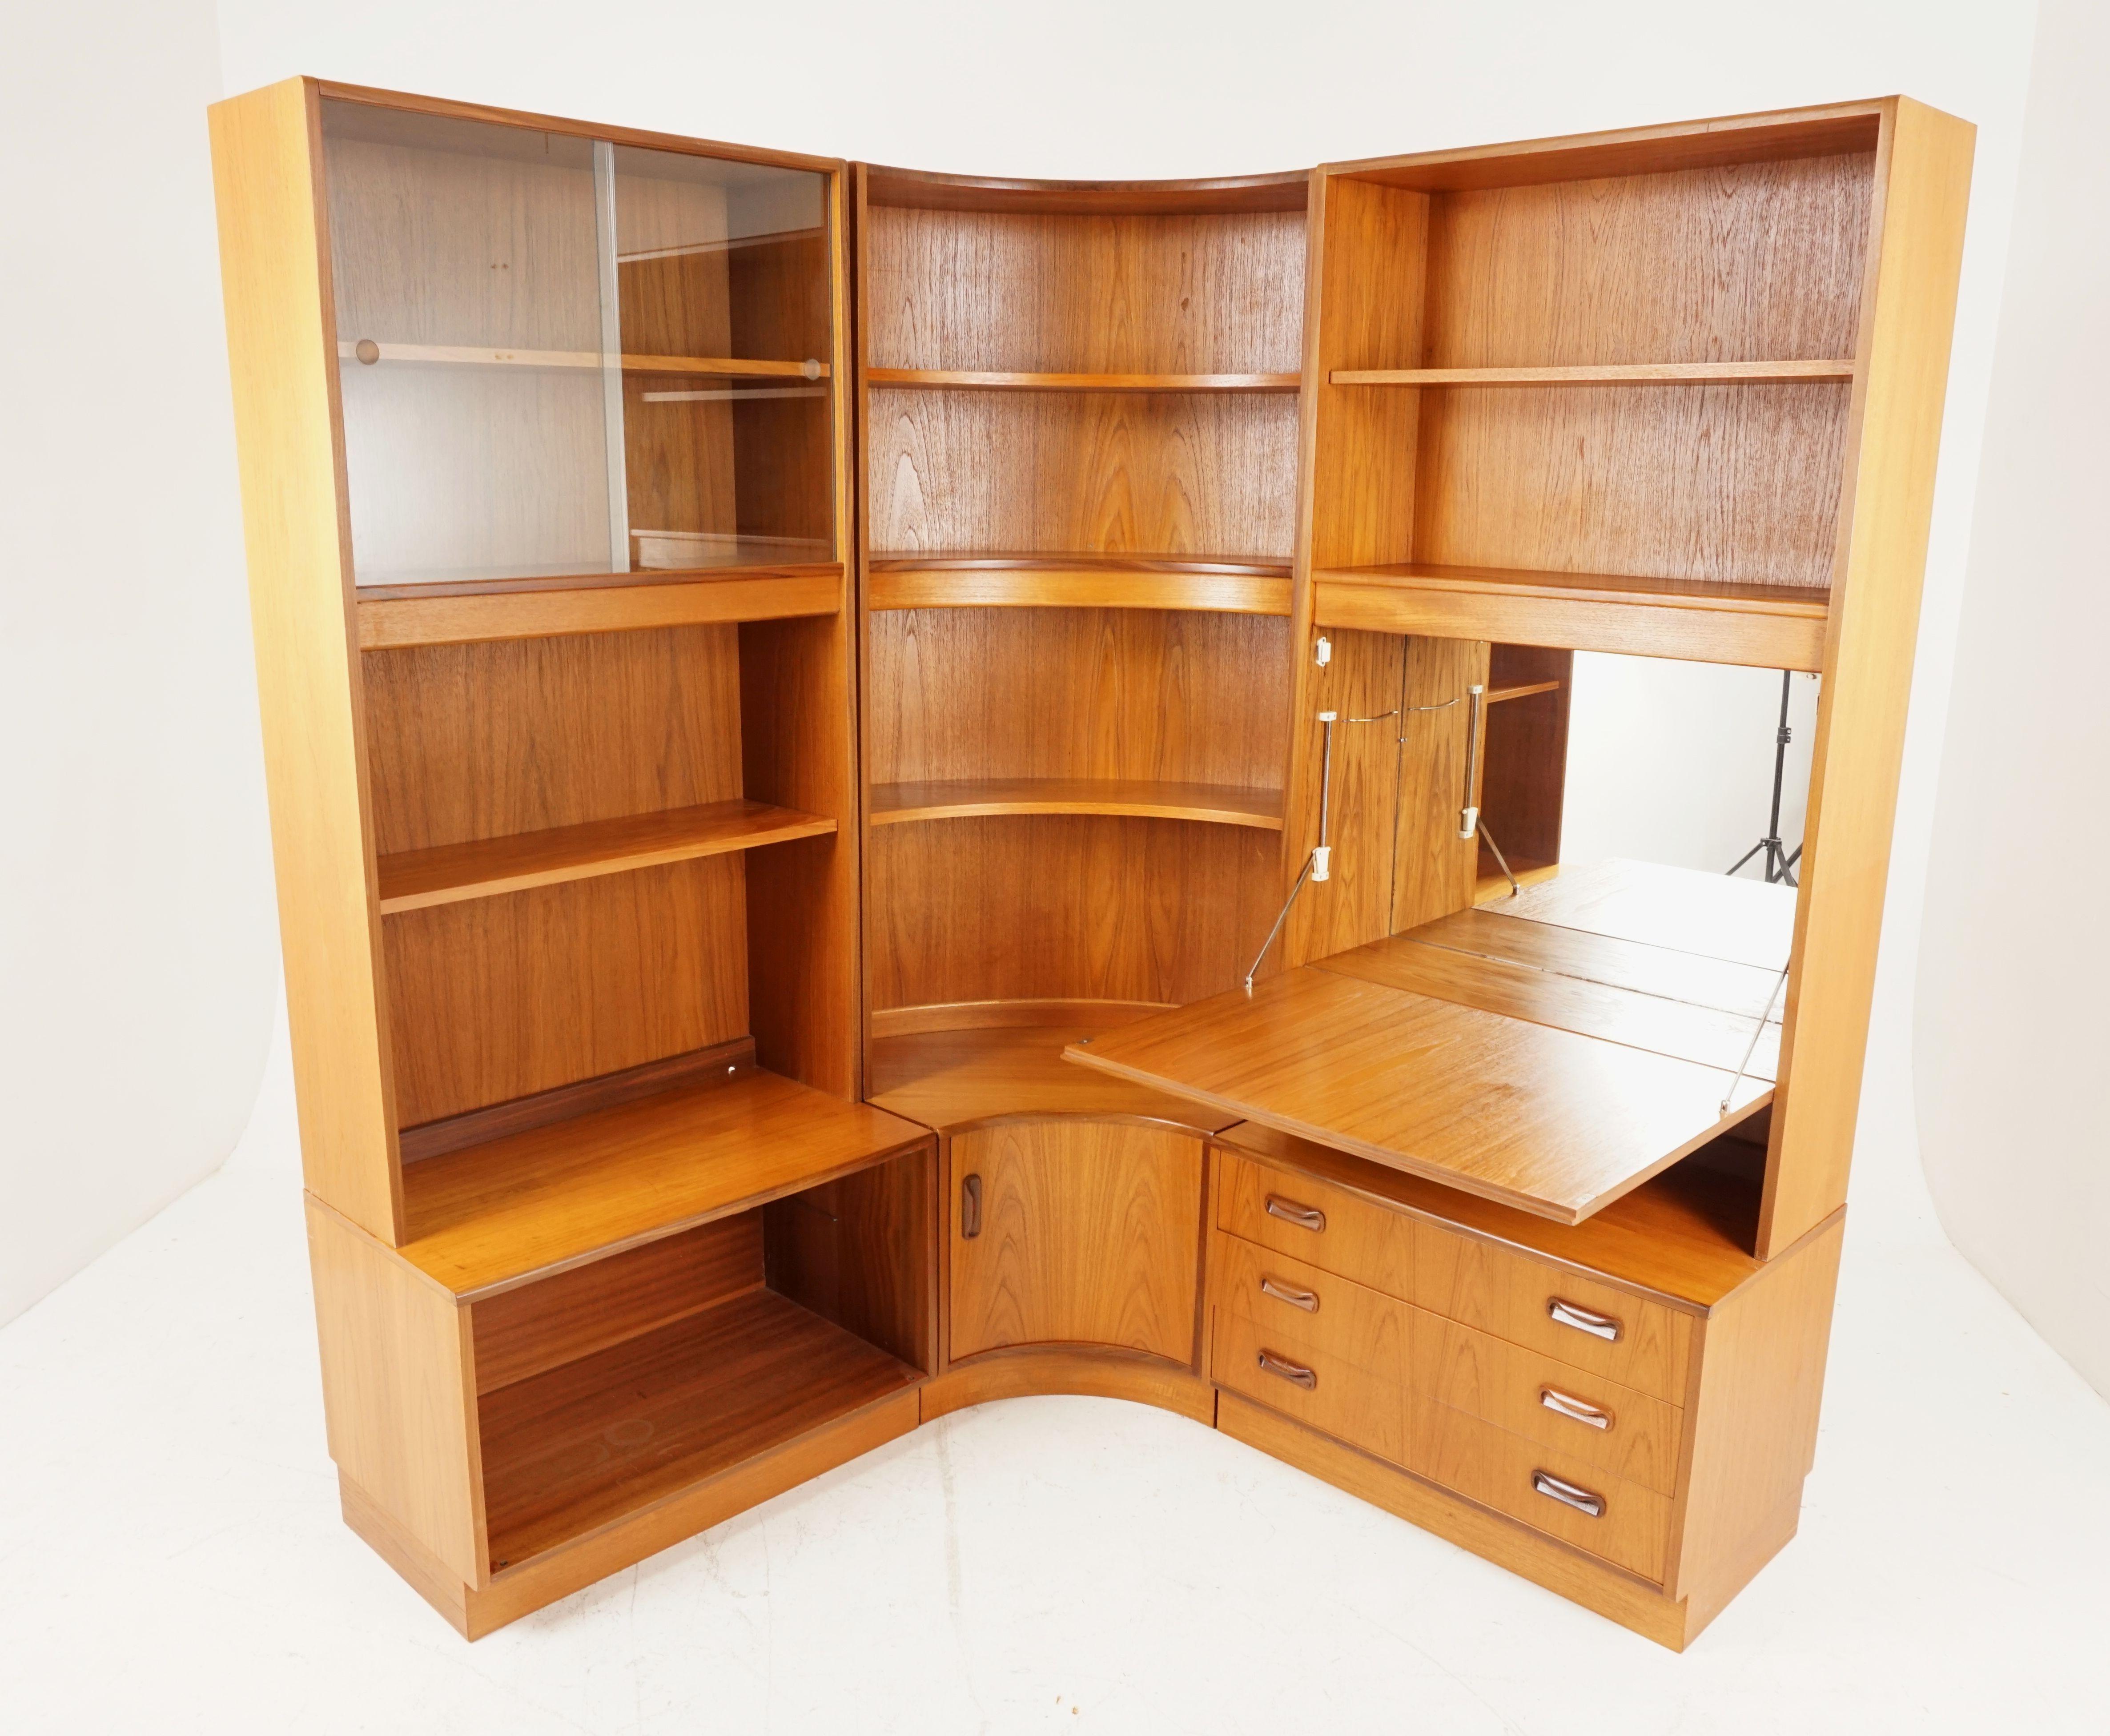 Vintage teak modular 6-piece bookcase, bar, Hutch, G-Plan 1977, B2168

Rounded open corner unit with 3 shelves above with inverted cupboard door below
Cabinet with pair of sliding glass doors and fixed shelf above open cabinet, standing on open